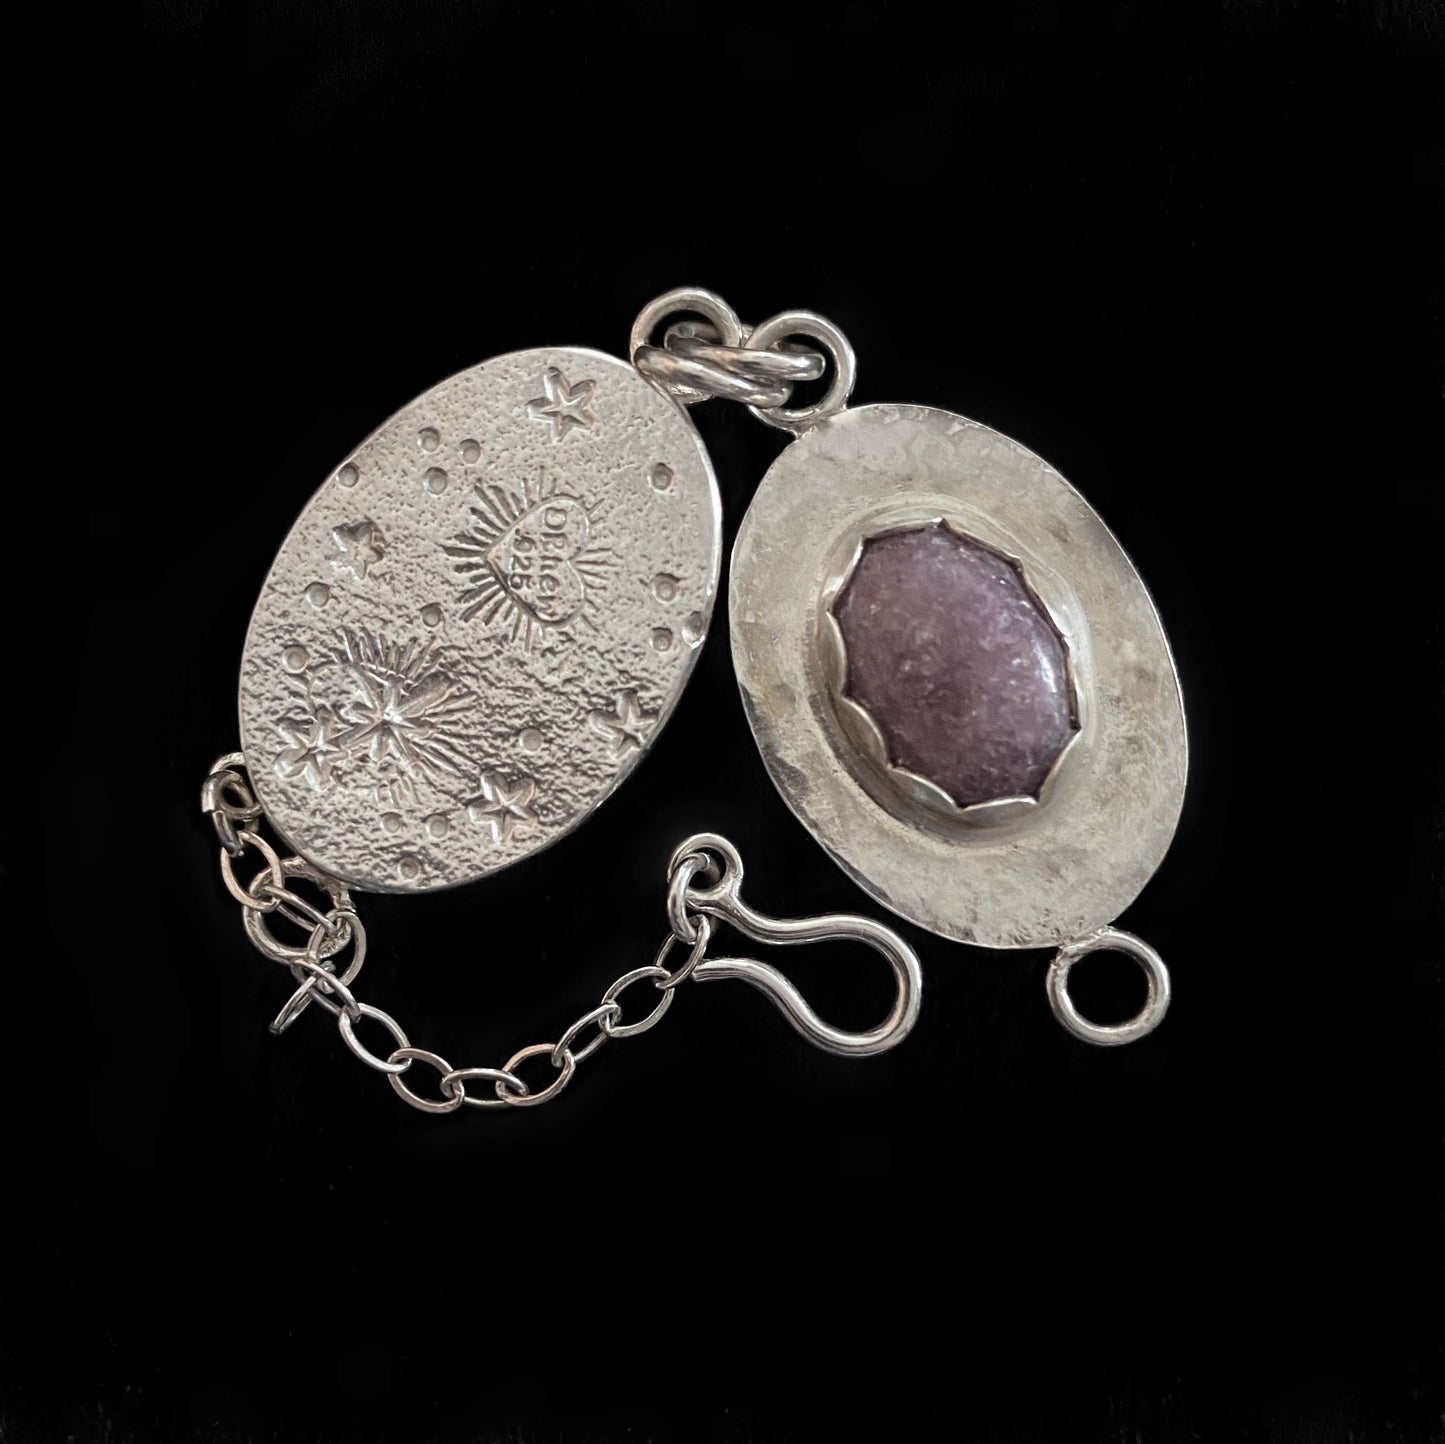 Dionysus - Charoite & Sterling Silver Locket Necklace